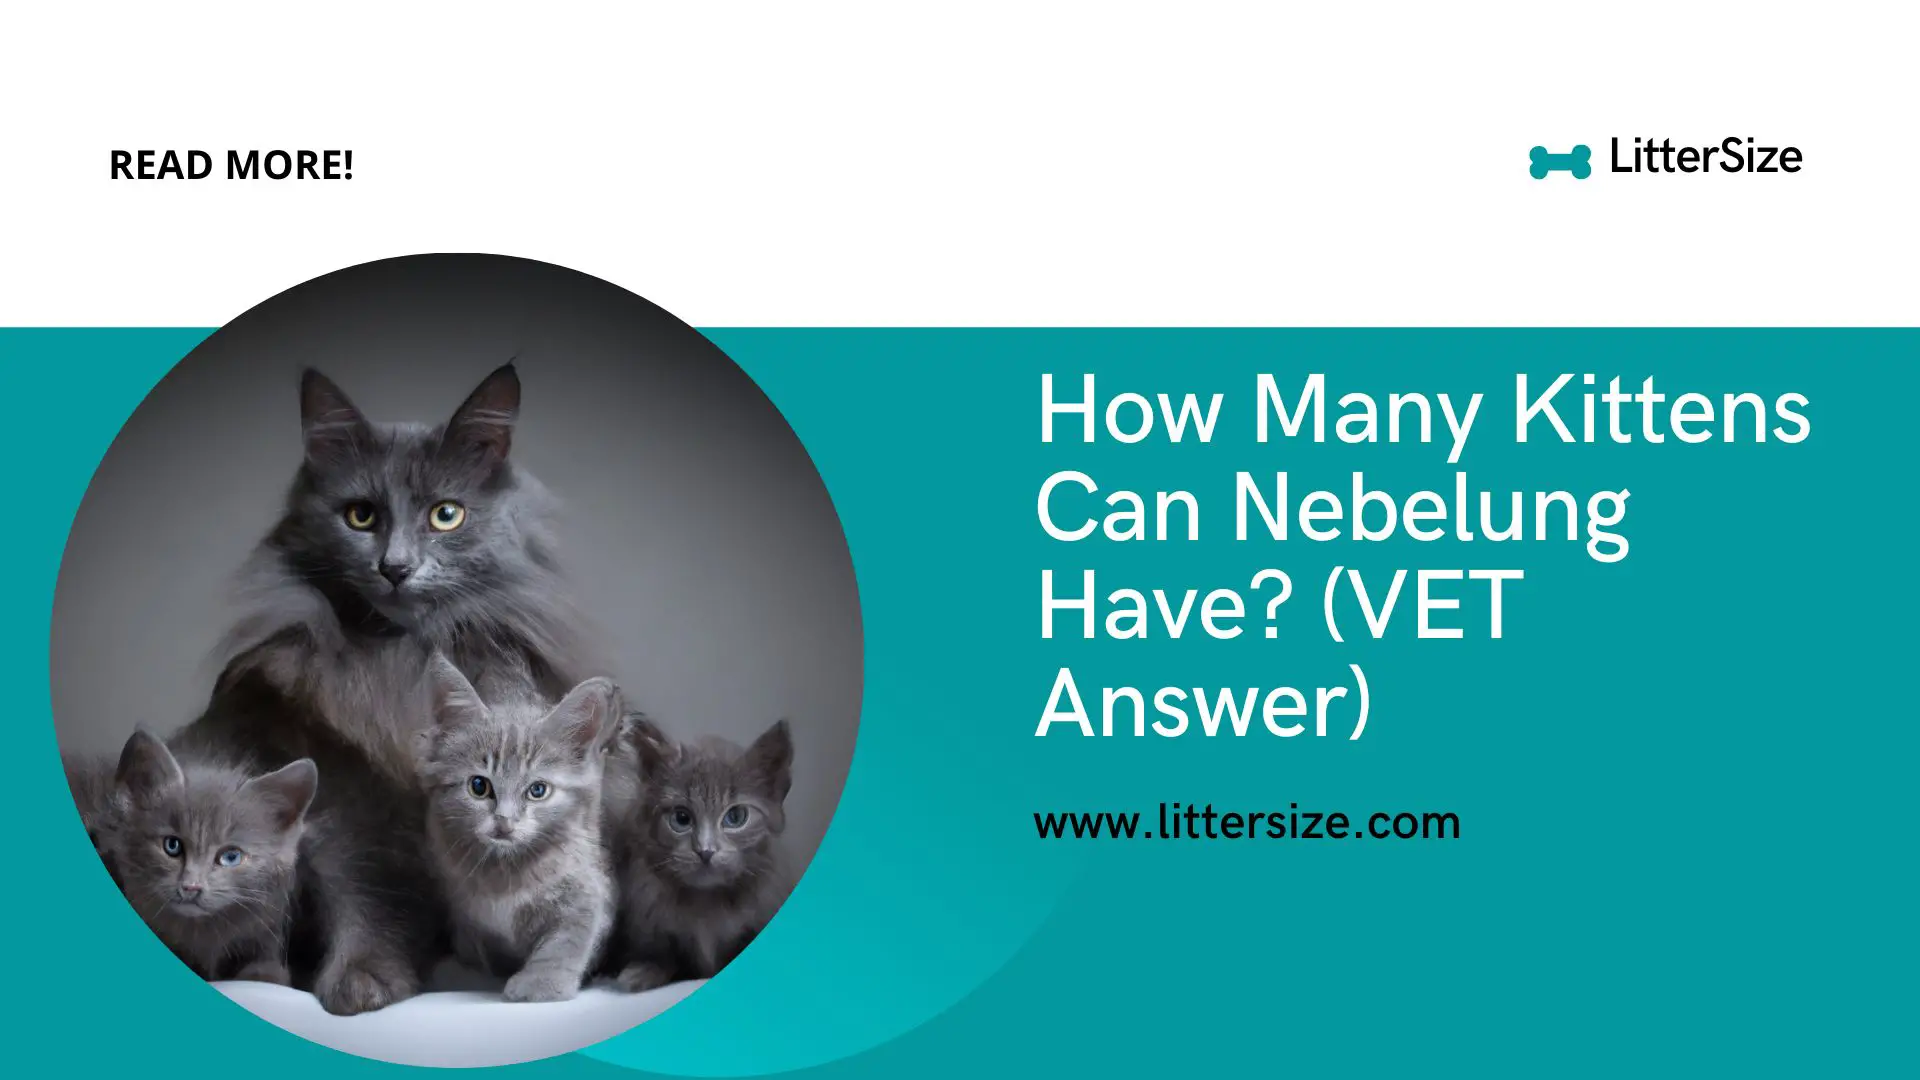 How Many Kittens Can Nebelung Have? (VET Answer)